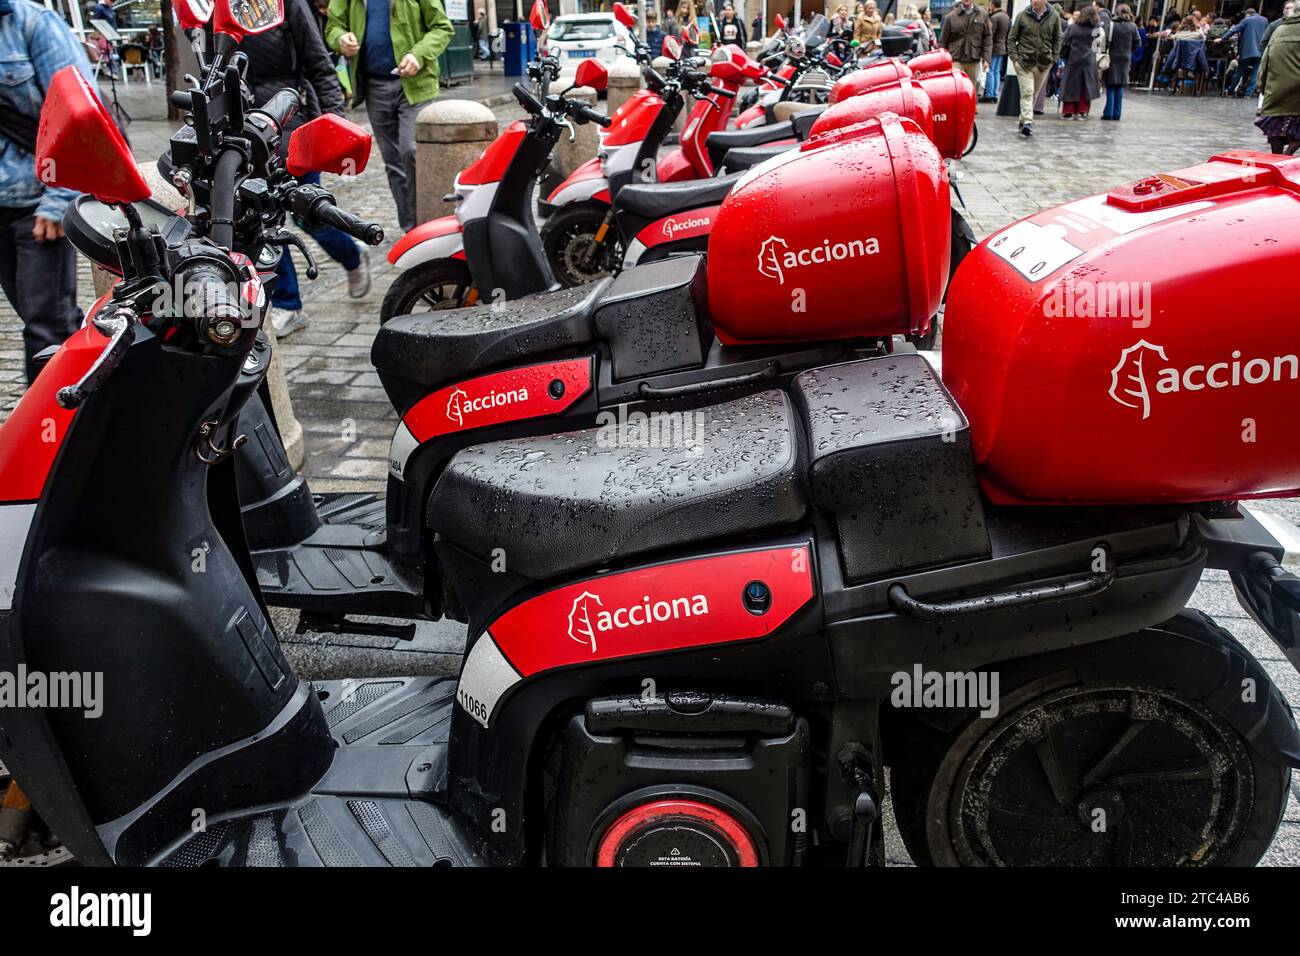 Acciona scooters, a scooter sharing company, in Seville, Spain. Stock Photo